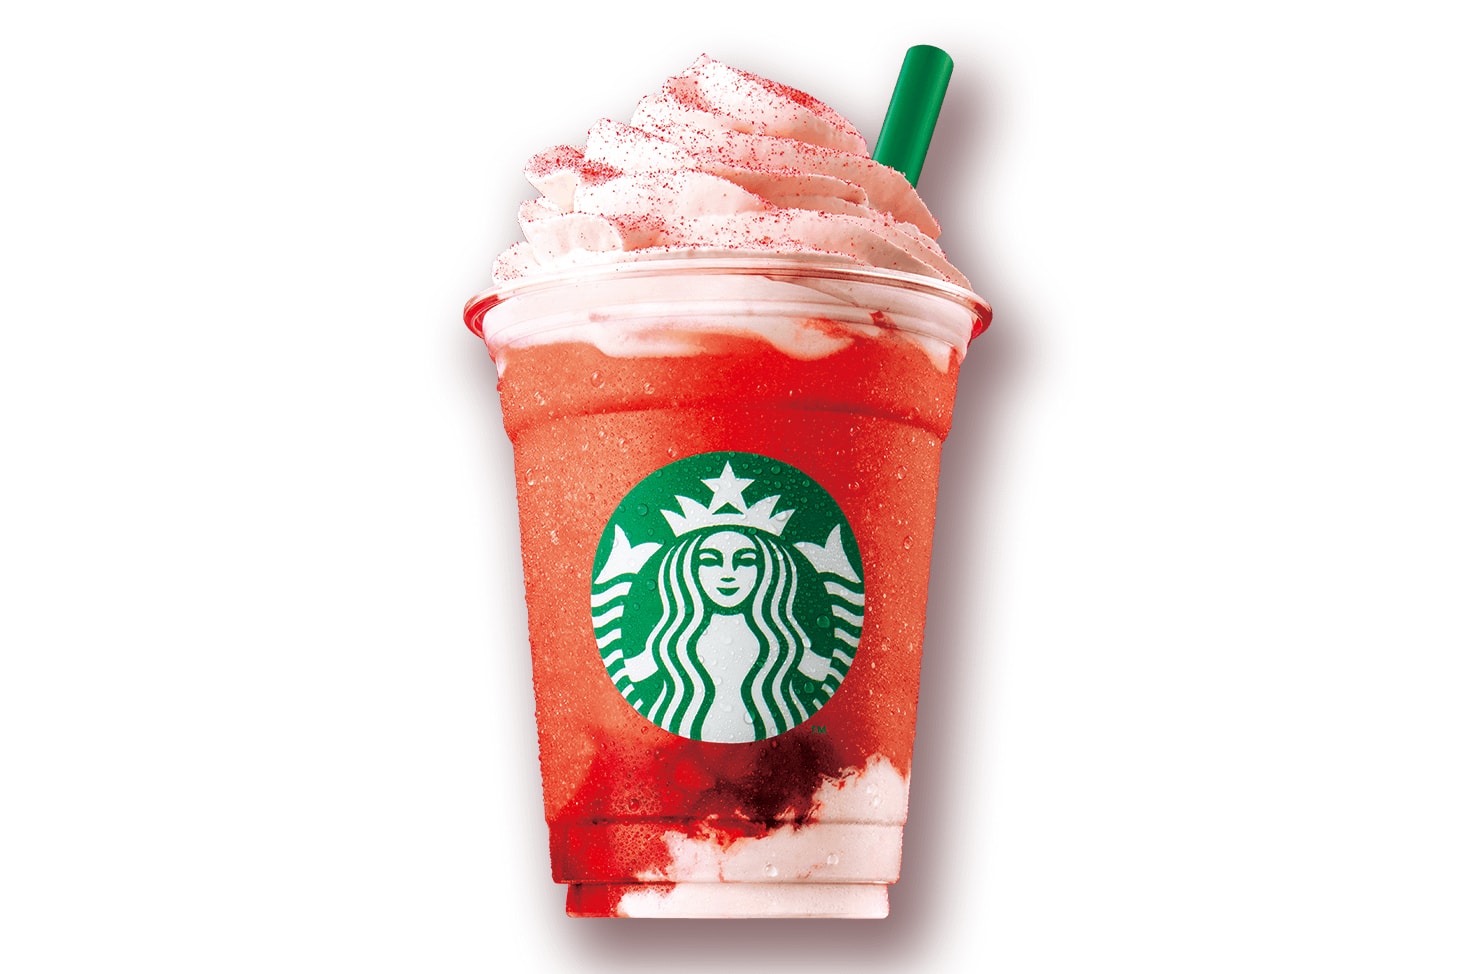 Starbucks Japan Strawberry Very Much Frappuccino Berry Frapp Limited Edition Where to Buy Instagram